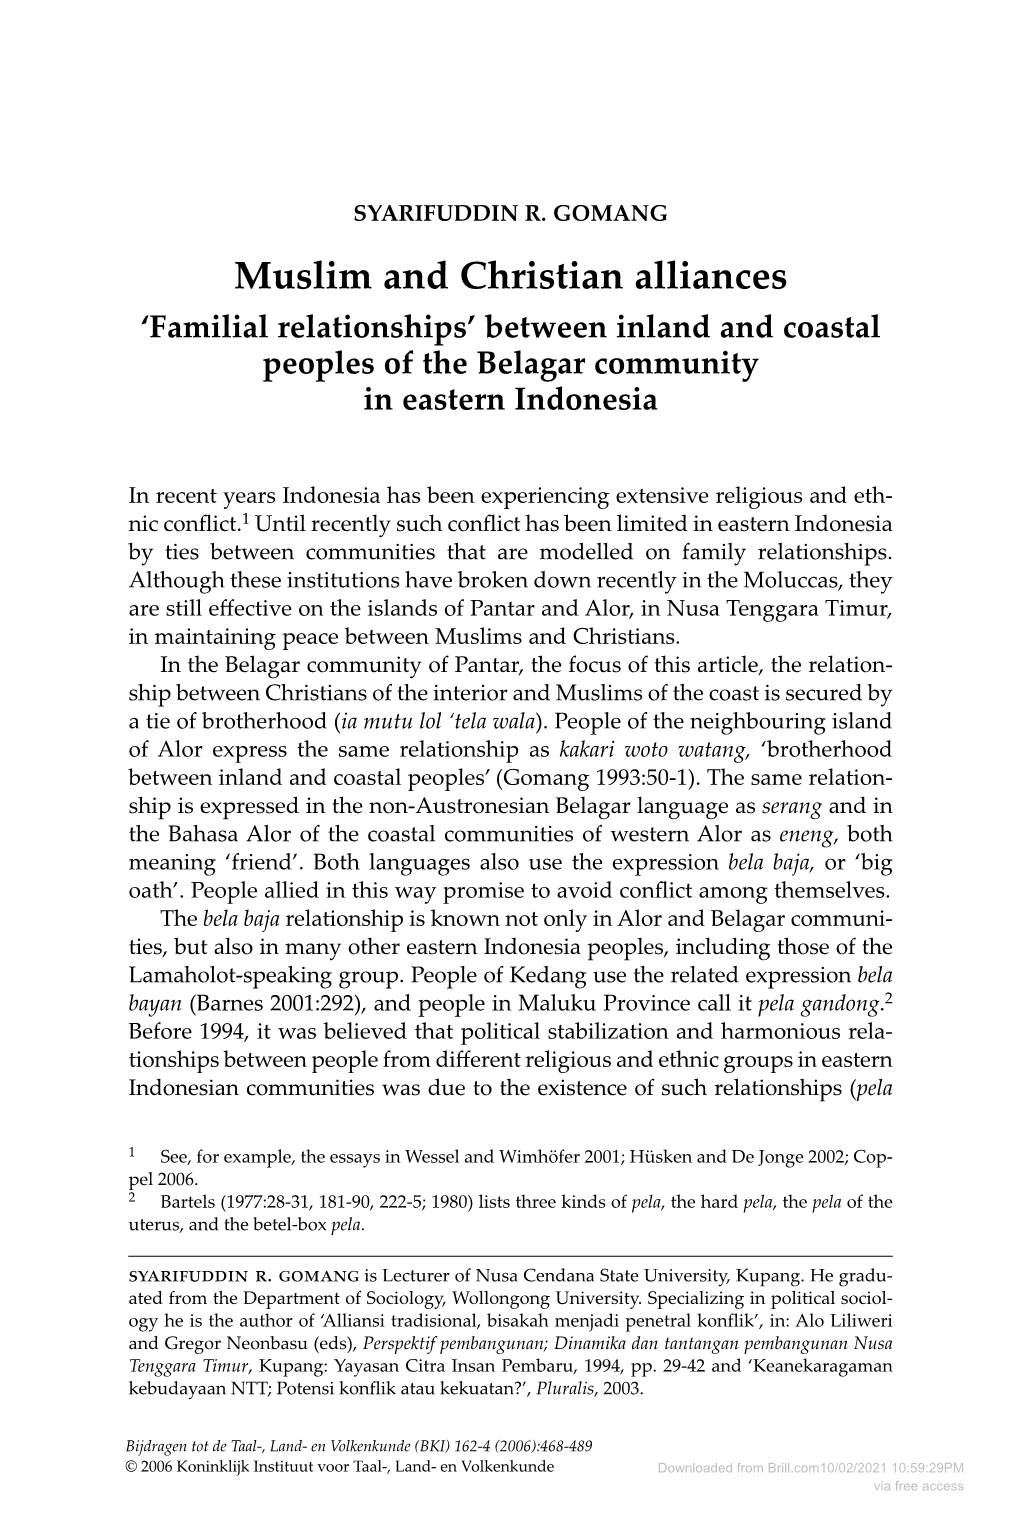 Muslim and Christian Alliances ‘Familial Relationships’ Between Inland and Coastal Peoples of the Belagar Community in Eastern Indonesia